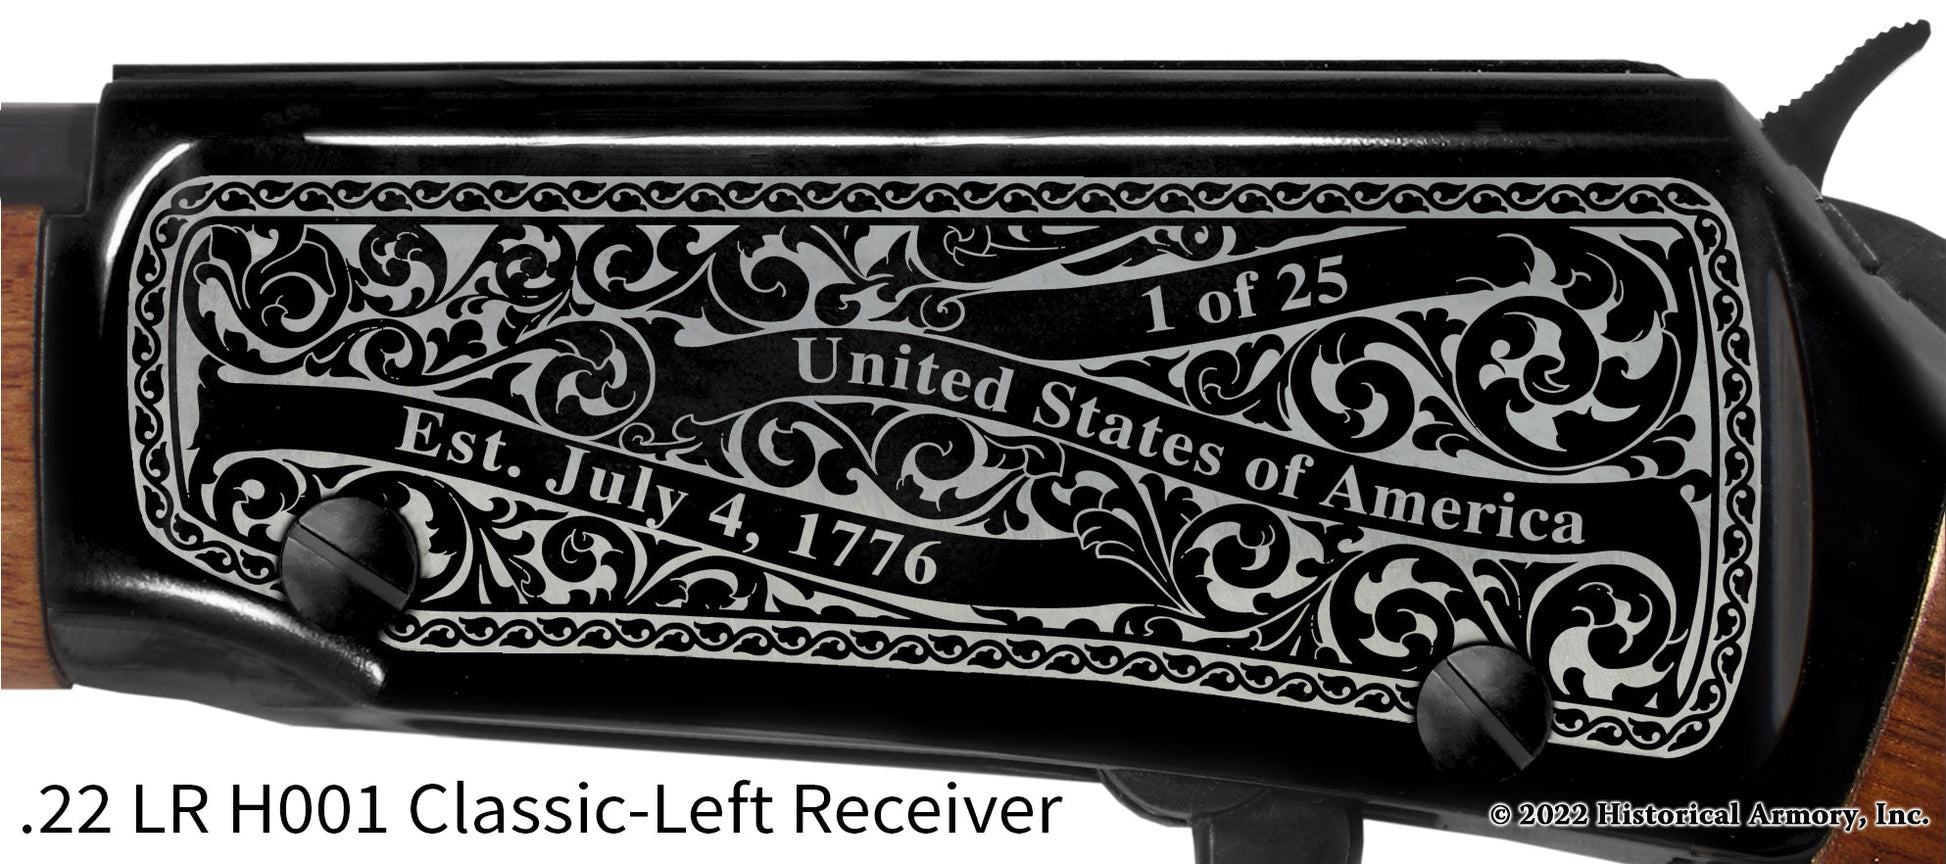 Jackson County Mississippi Engraved Henry H001 Rifle